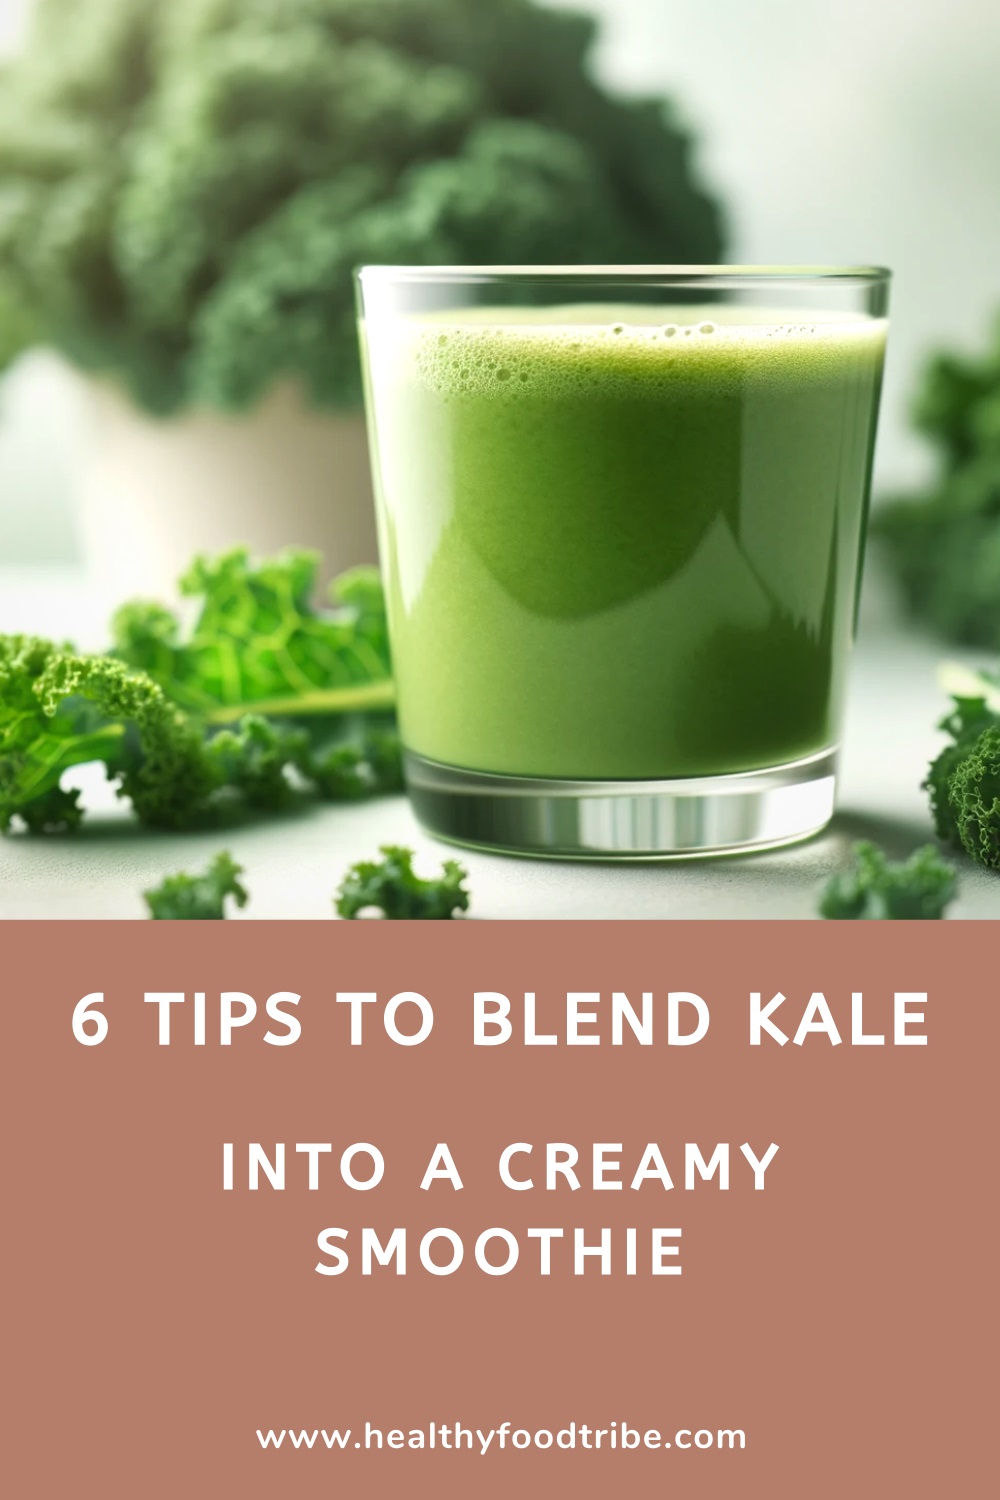 How to blend kale into a smoothie